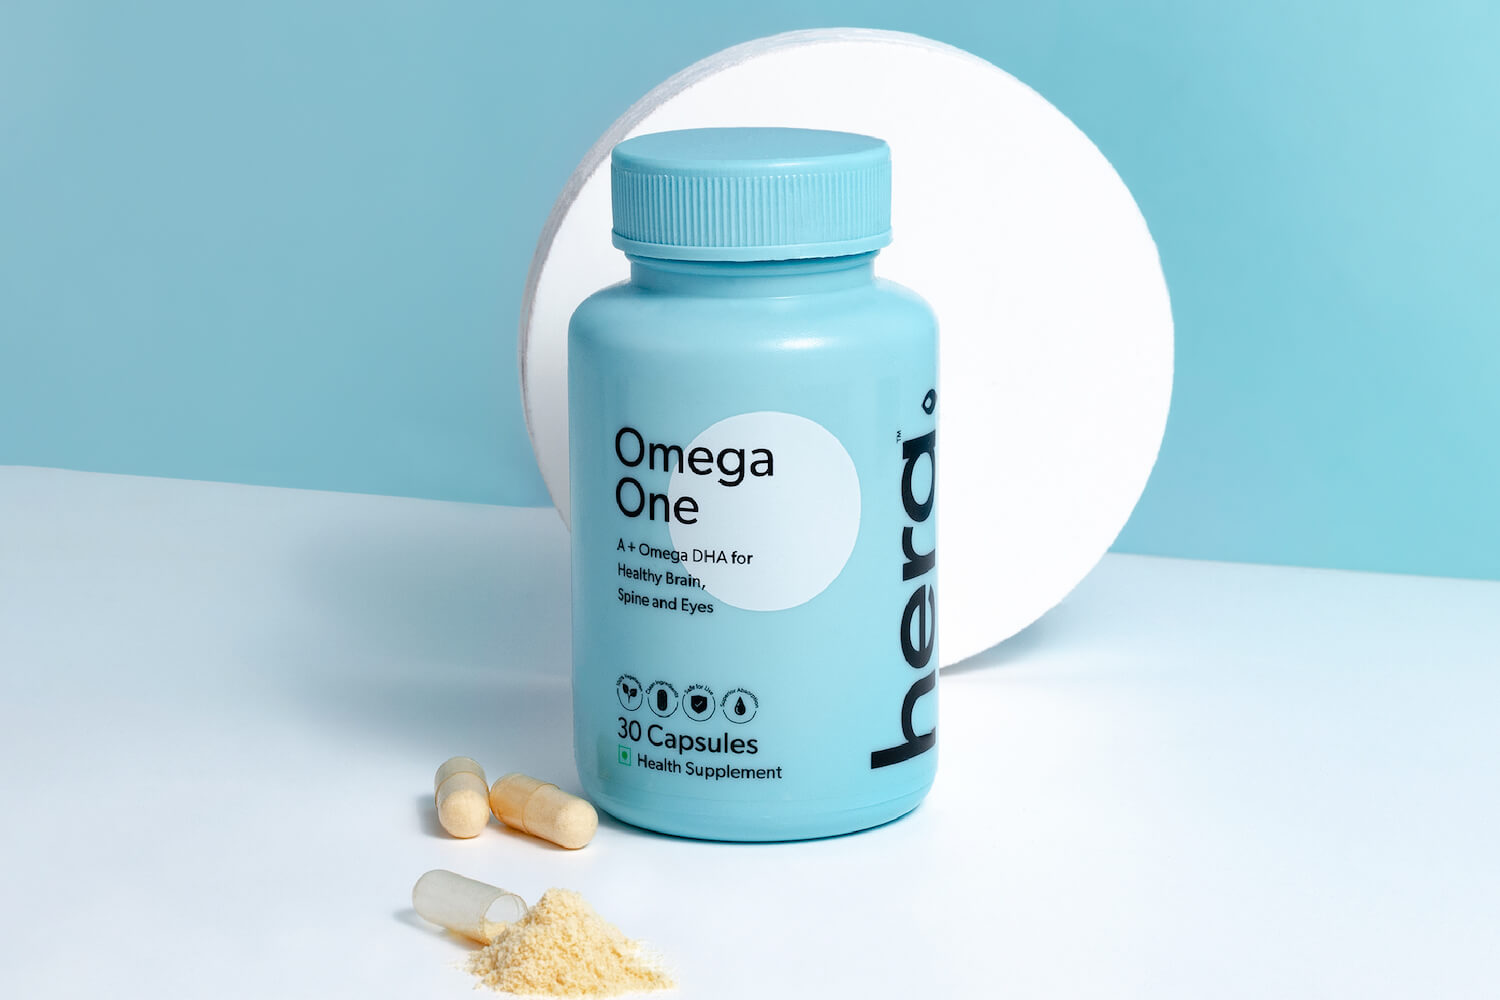 Hera Omega One to prevent Miscarriage